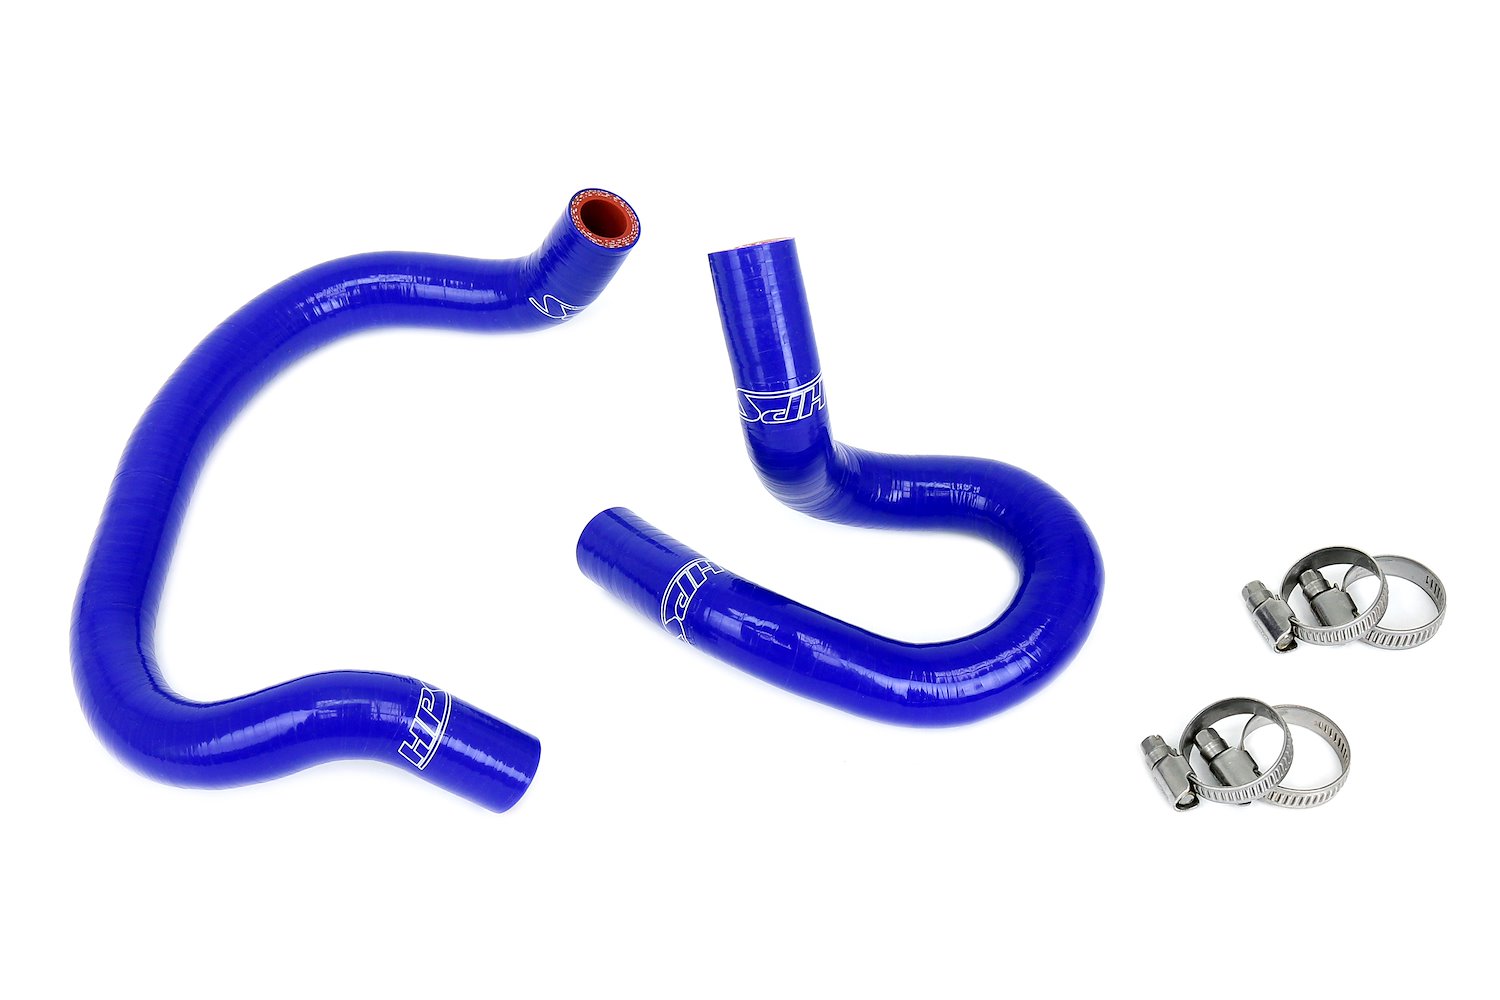 57-2022-BLUE Heater Hose Kit, 3-Ply Reinforced Silicone, Replaces Rubber Heater Coolant Hoses